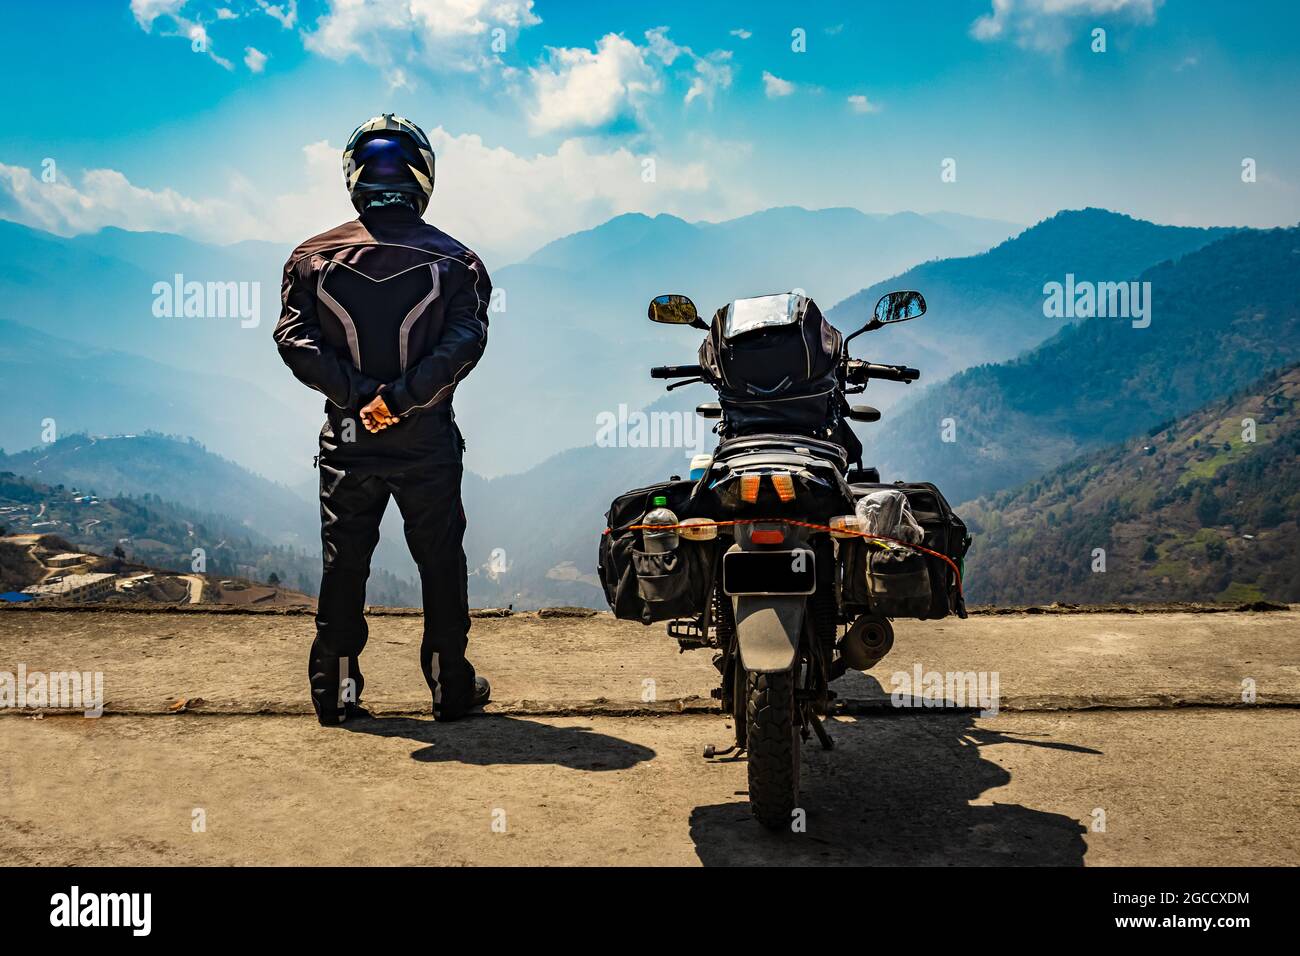 man motorcyclist standing at hill top with his loaded motorcycle and pristine natural view image is taken at bomdila arunachal pradesh india. Stock Photo